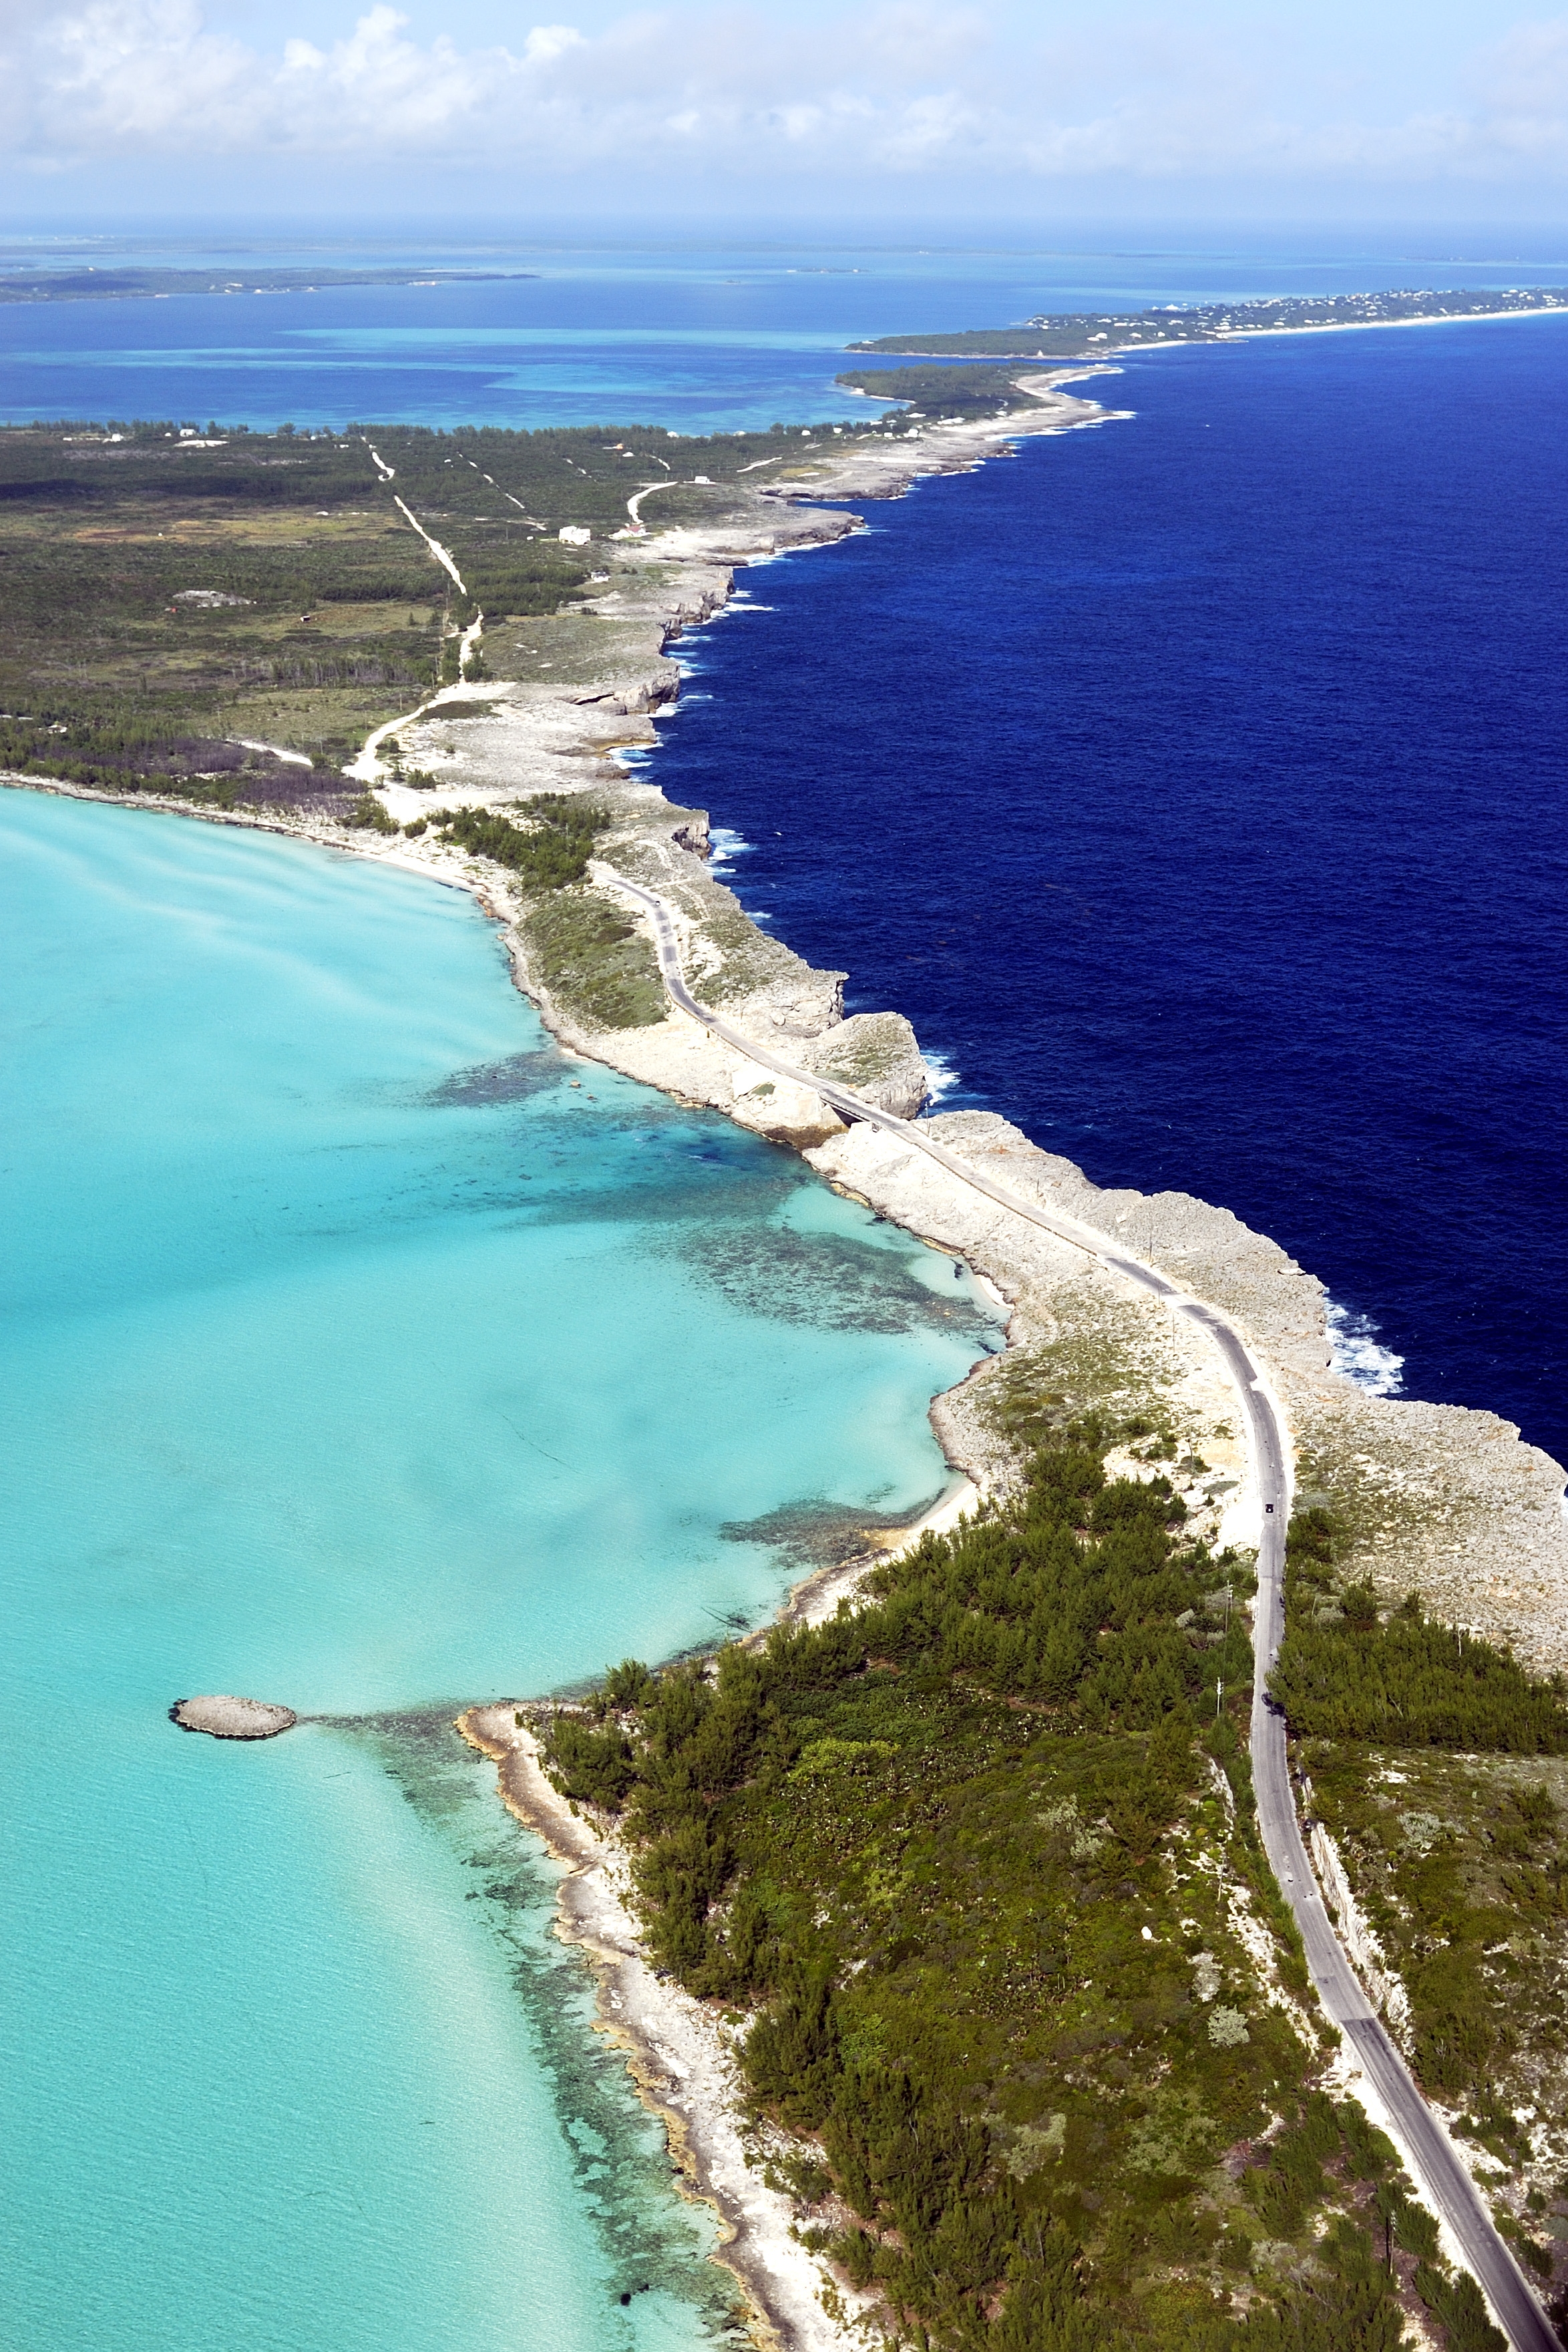 The contrast between deep, dark Atlantic Ocean waters and shallow, light turquoise waters of the Bahamas Bank is evident in this aerial of Eleuthera Island. Photo courtesy Bahamas Ministry of Tourism.